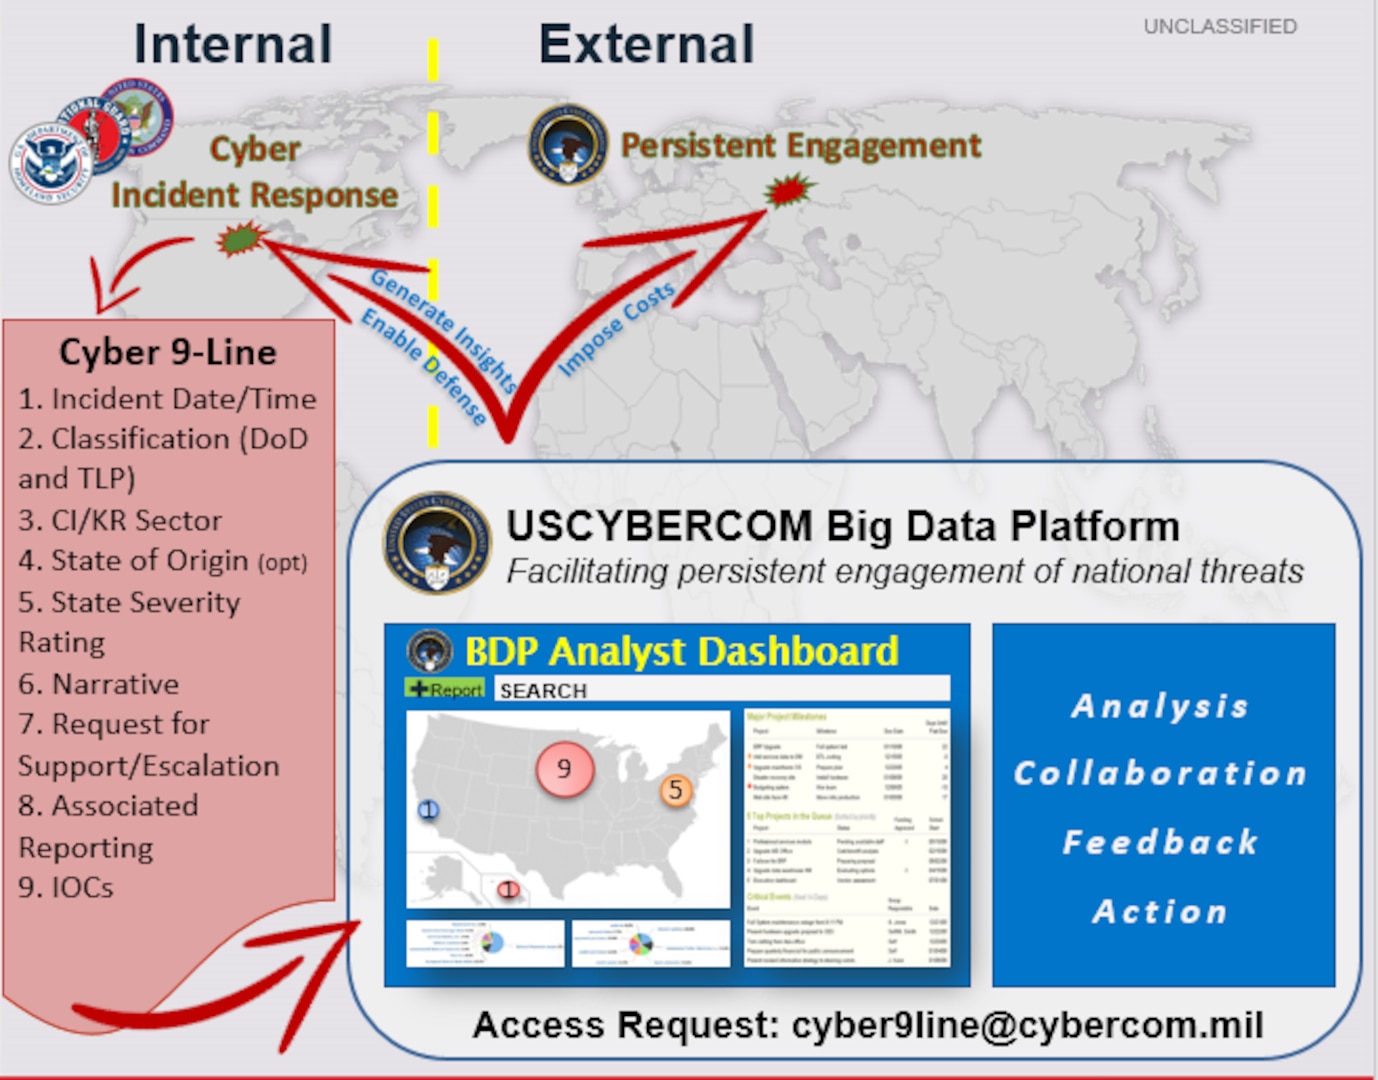 Graphic depicting incident data flow and the use of the “Cyber 9-Line